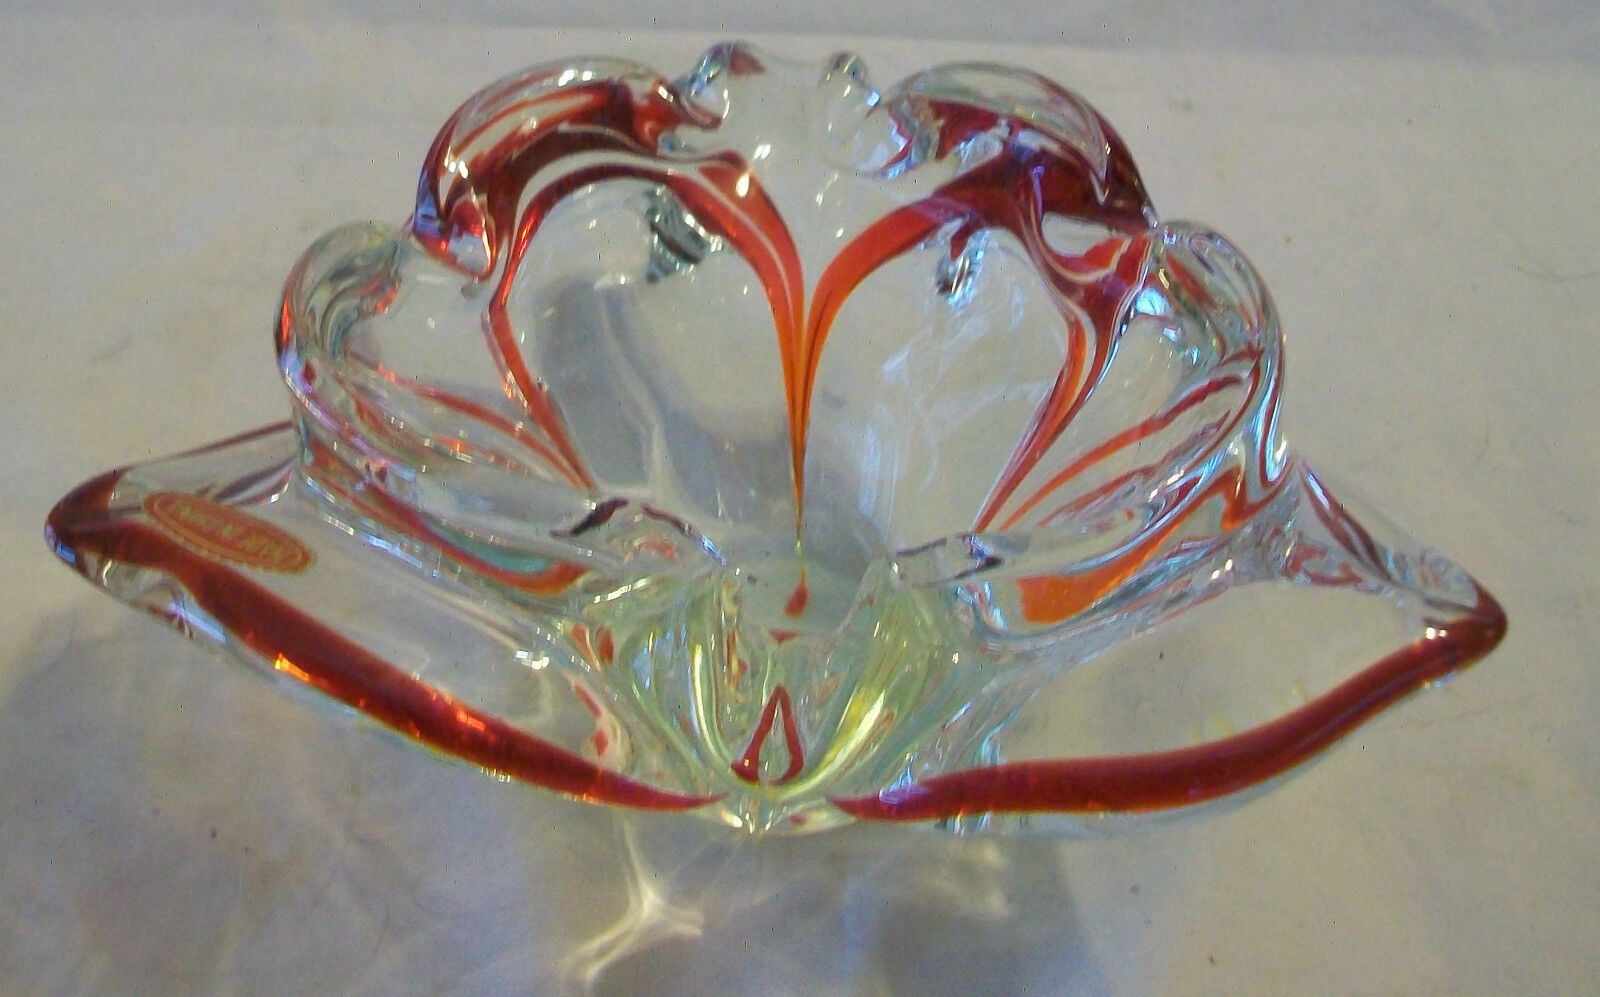 RED AND CLEAR GLASS ASH TRAY OR CANDY DISH